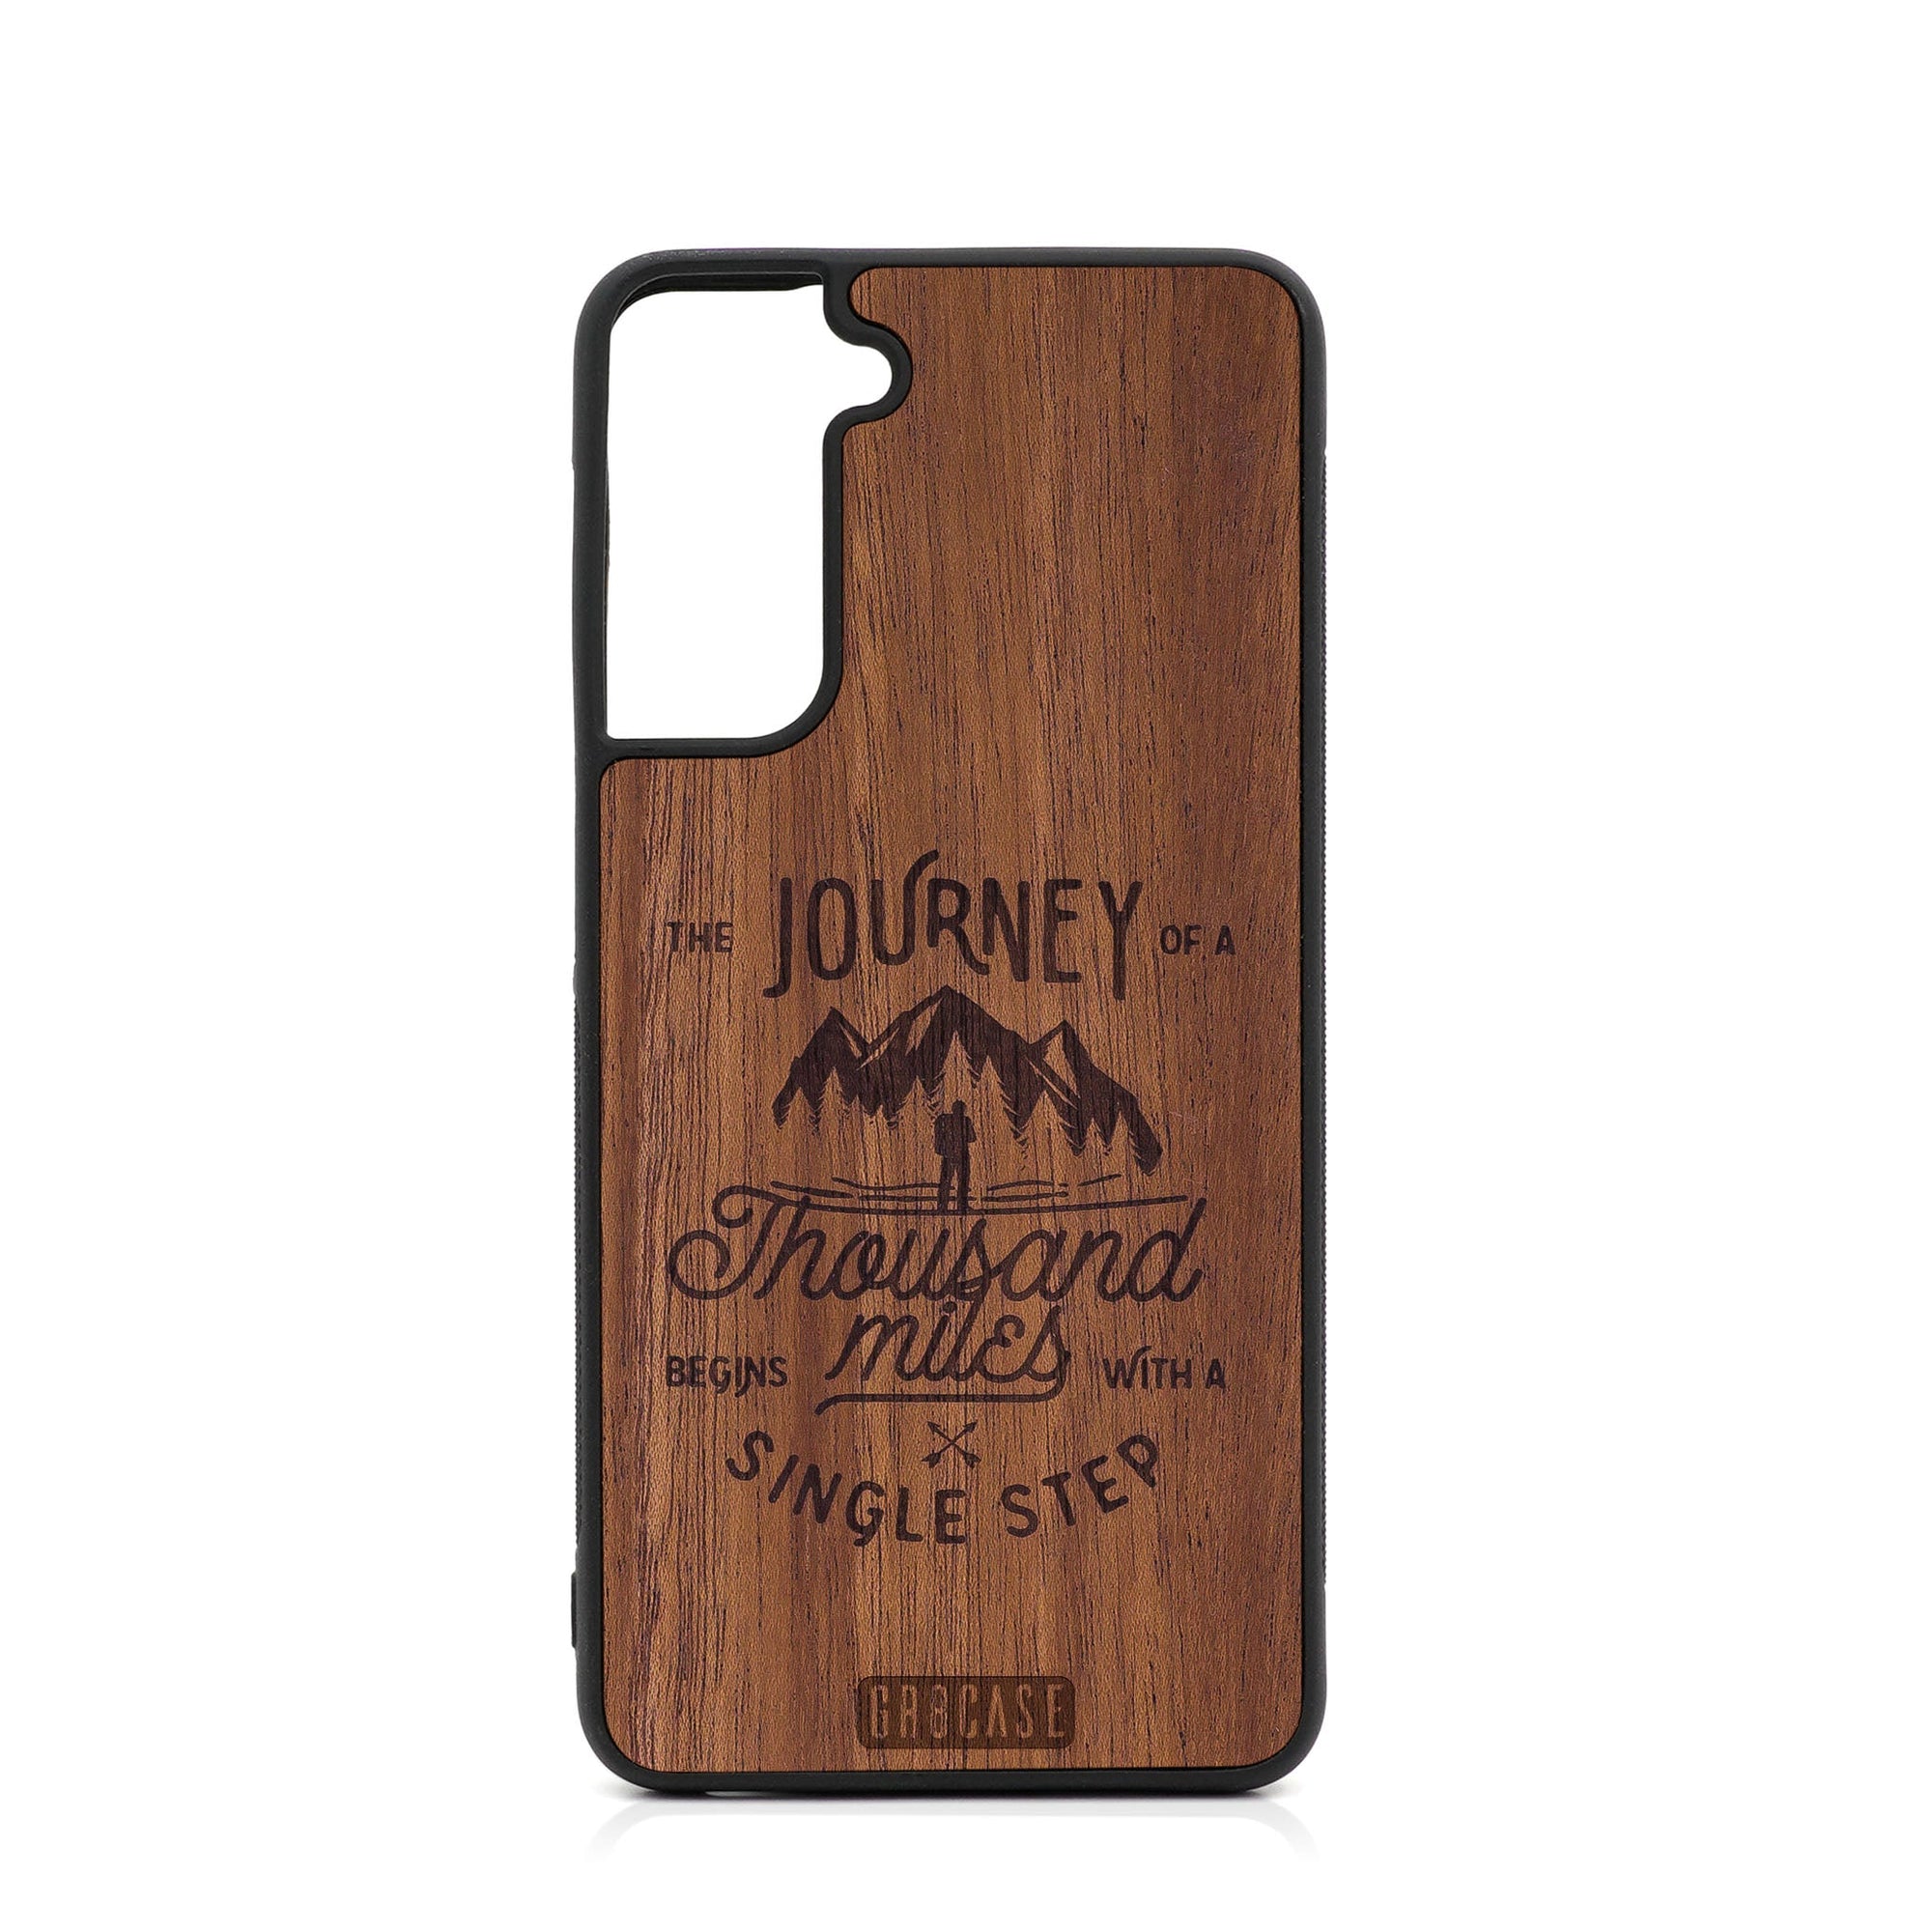 The Journey of A Thousand Miles Begins With A Single Step Design Wood Case For Samsung Galaxy S22 Plus